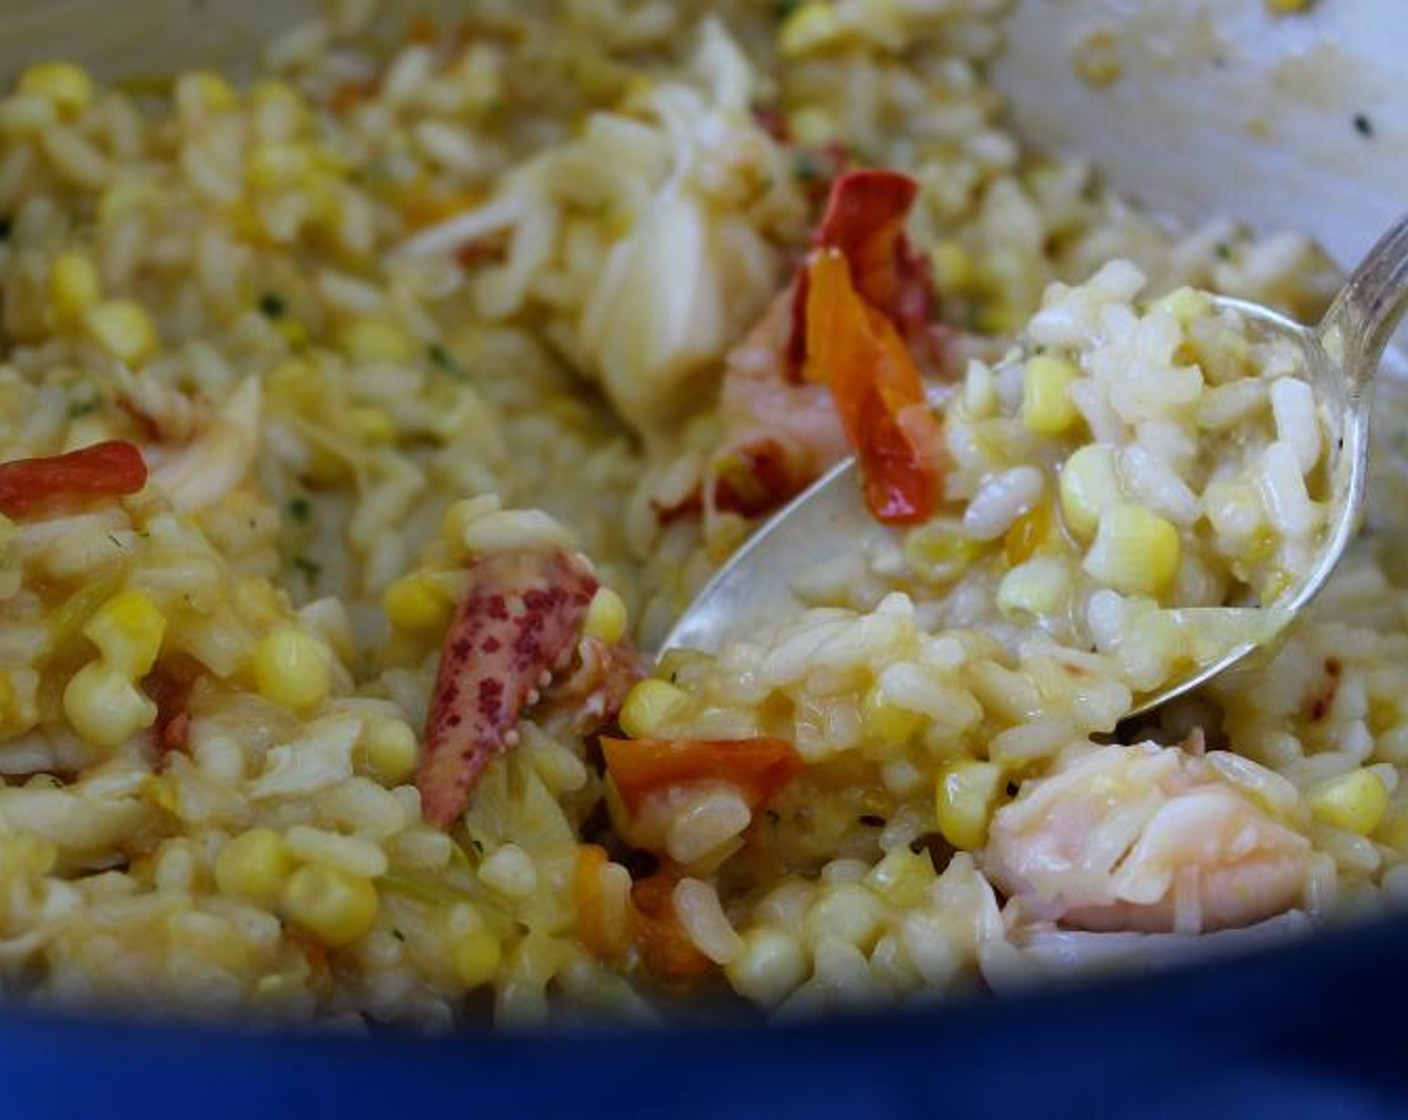 step 7 When the risotto has been cooking for 15 minutes, add the Cherry Tomatoes (1 1/2 cups), corn, Kosher Salt (1/2 Tbsp), and Ground Black Pepper (1/2 tsp). Continue cooking and adding stock, stirring almost constantly, until the rice is tender but still firm.